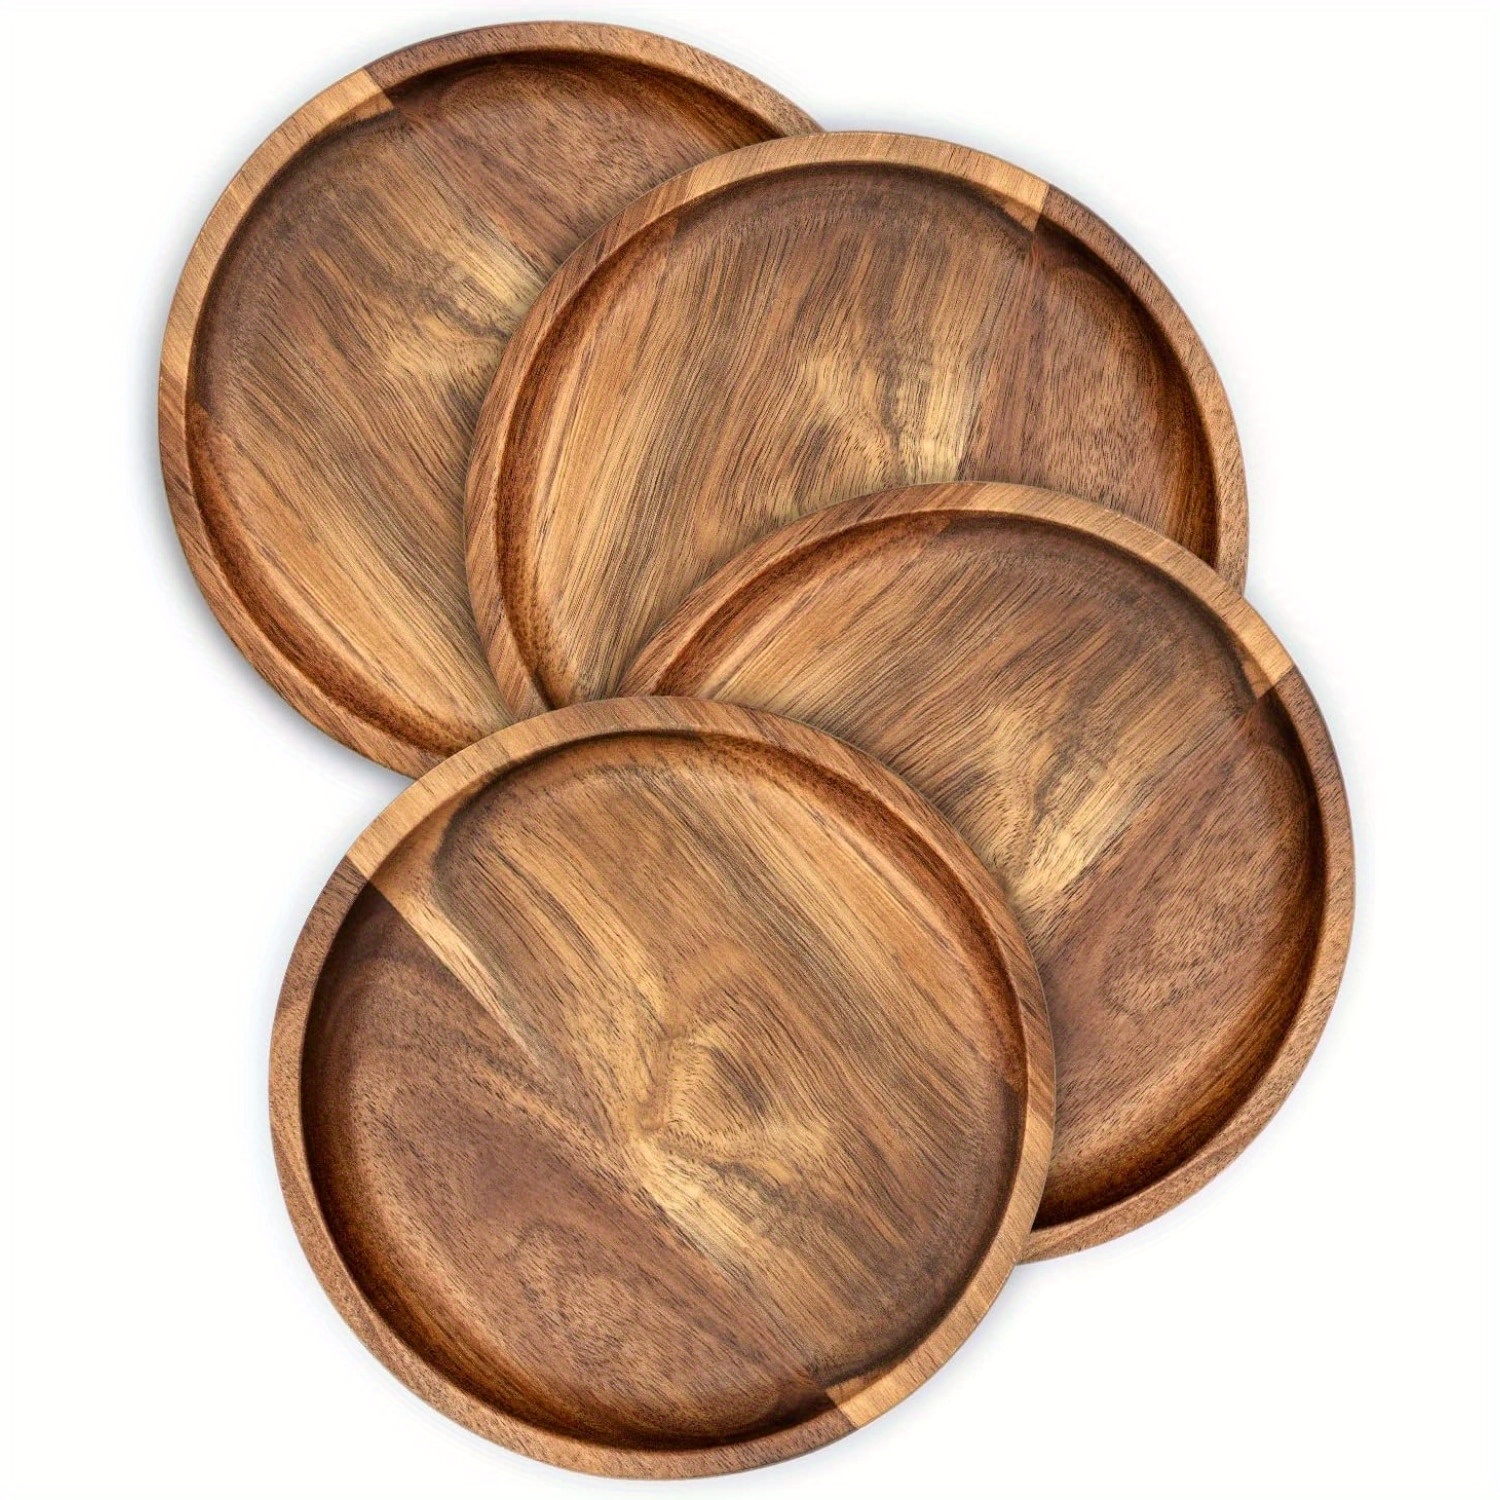 

Set Of 4 Premium Acacia Wood Serving Plates - Perfect For Desserts, Snacks, Fruits & Appetizers - Ideal For Restaurants, Bars & Parties